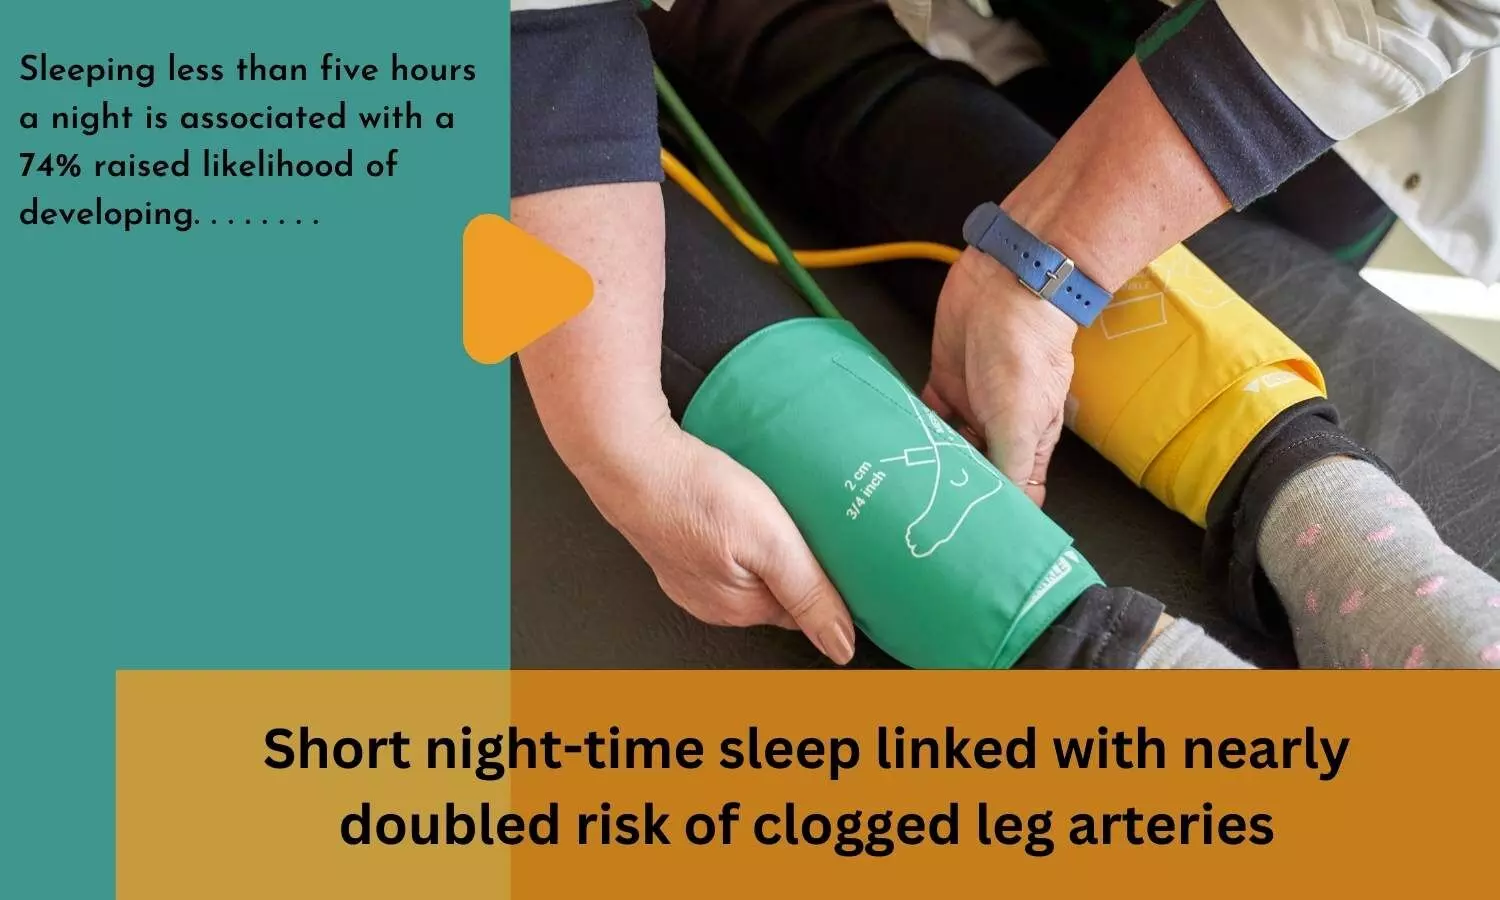 Short night-time sleep linked with nearly doubled risk of clogged leg arteries